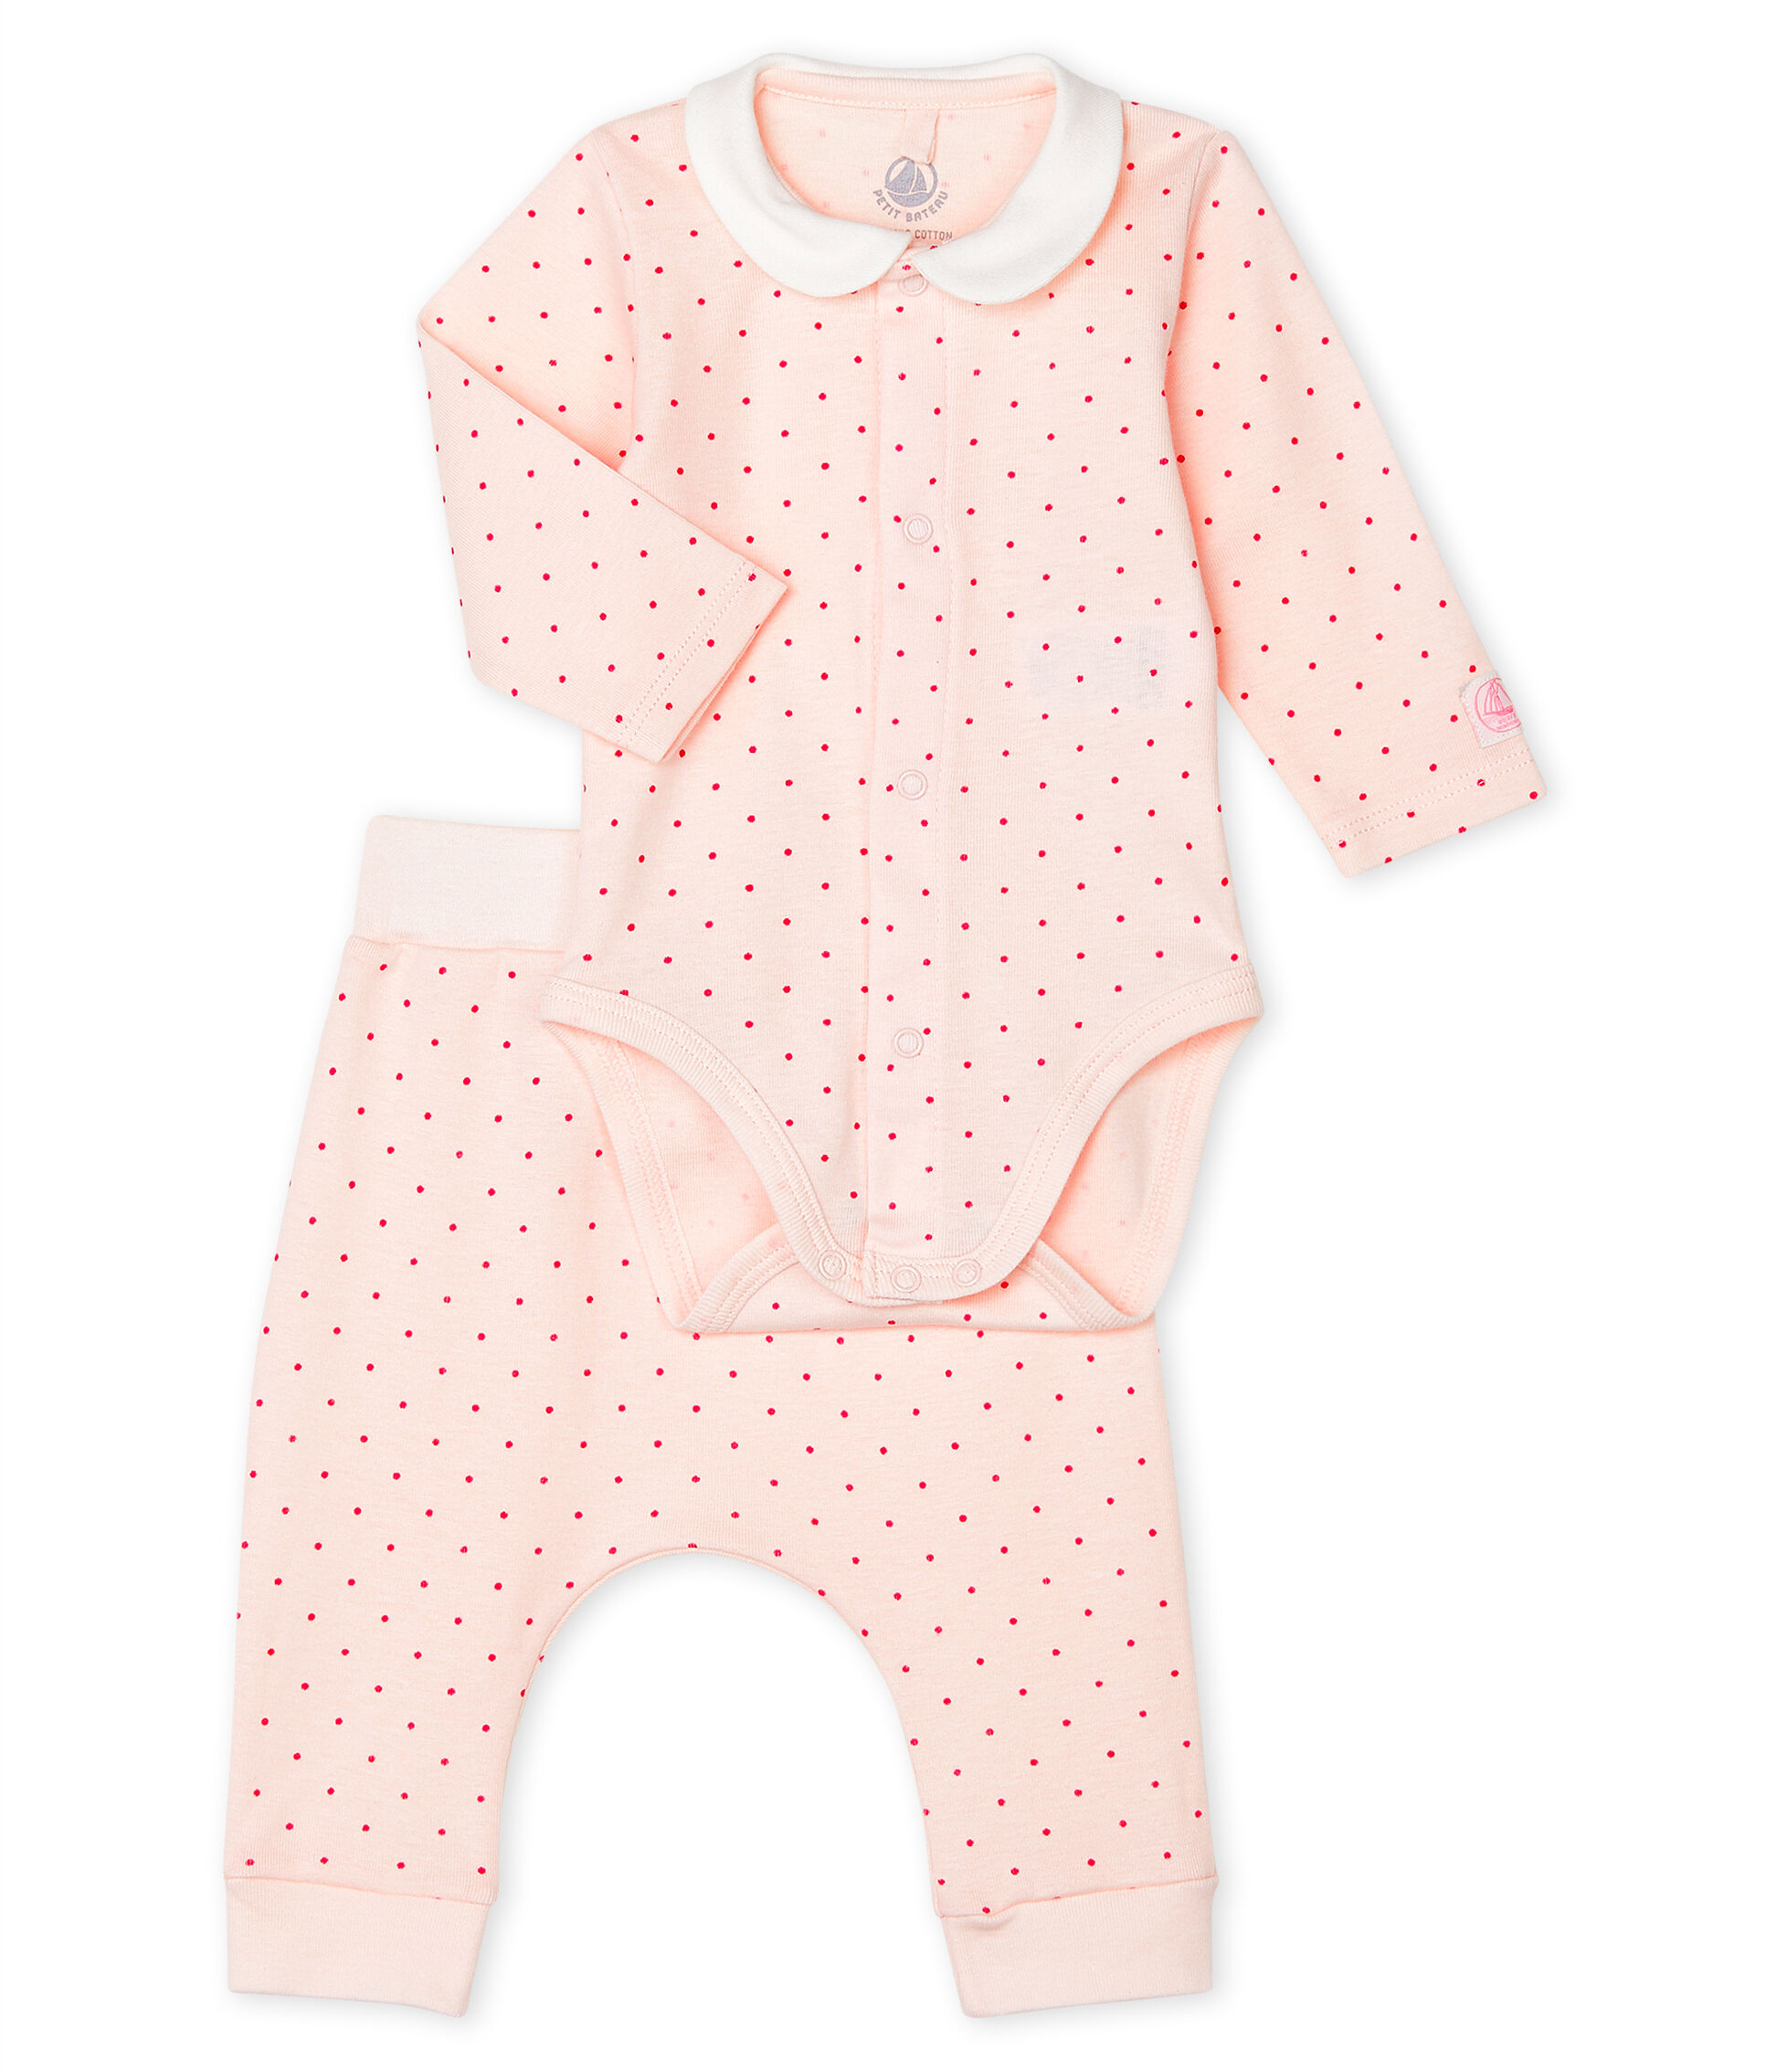 Baby Girls' Ribbed Clothing - 2-piece 